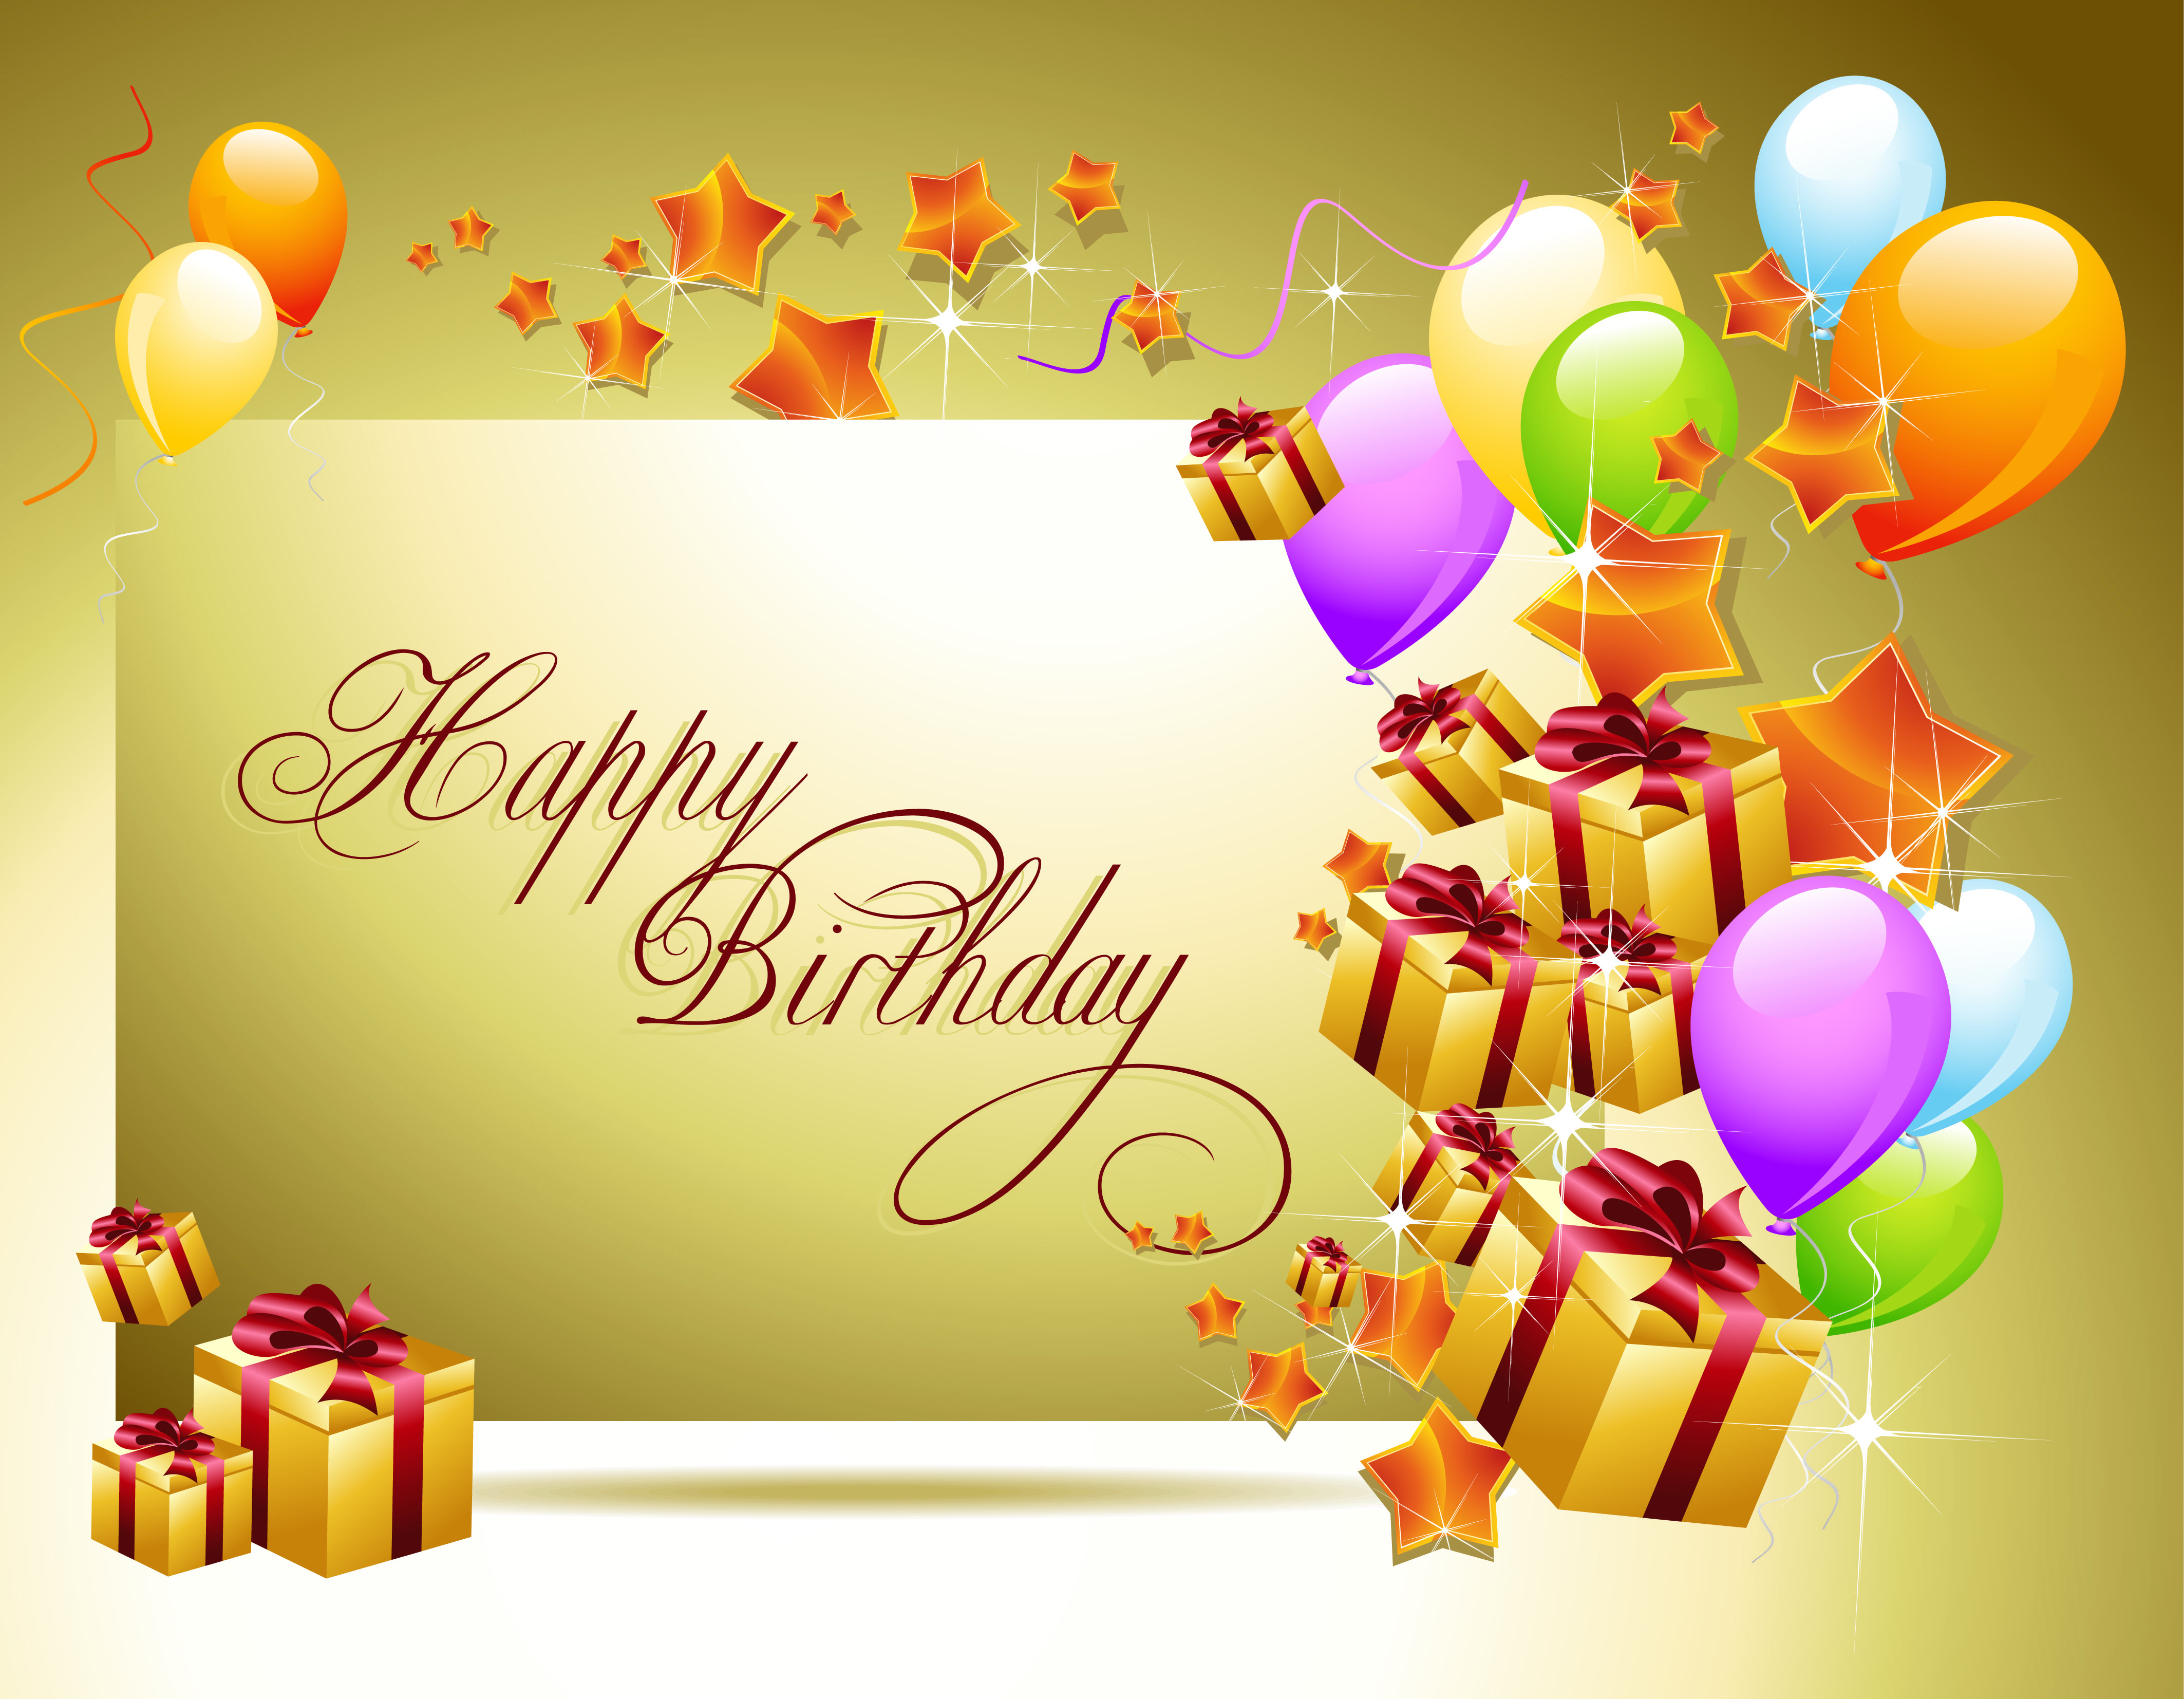 Congratulations on the birthday golden background wallpapers and